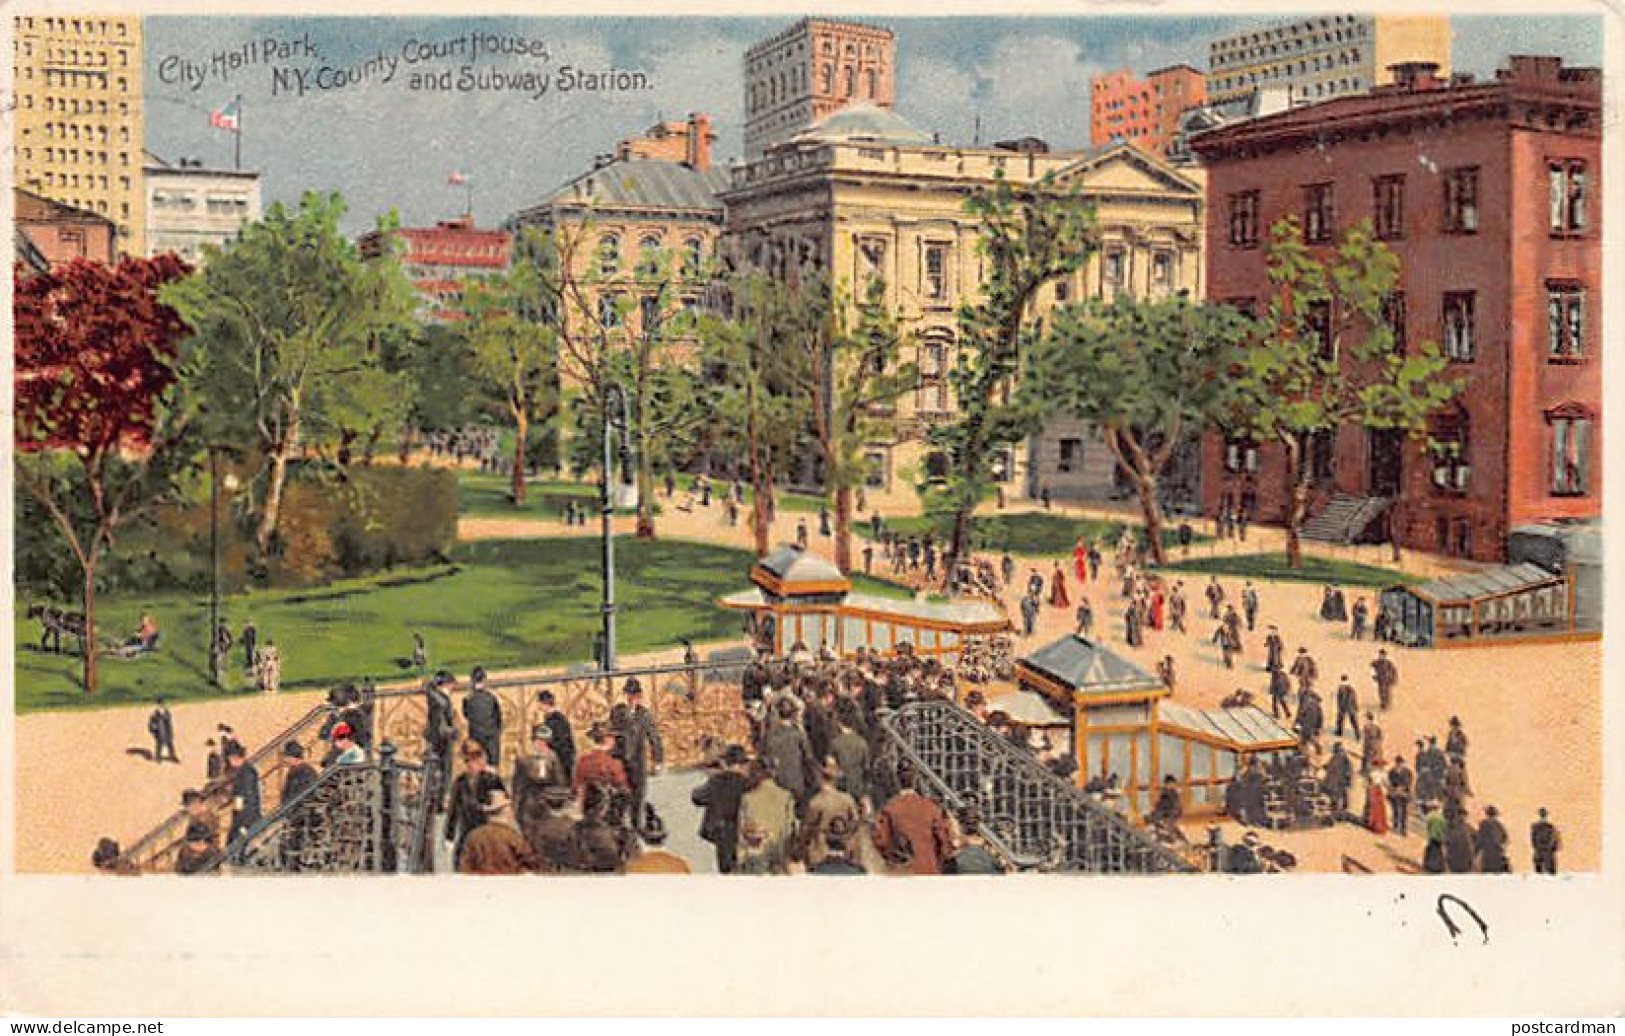 Usa - NEW YORK CITY - City Hall Park, N.Y. County Court House And Subway Station - LITHO - Publ. J. Koehler 1505 - Manhattan